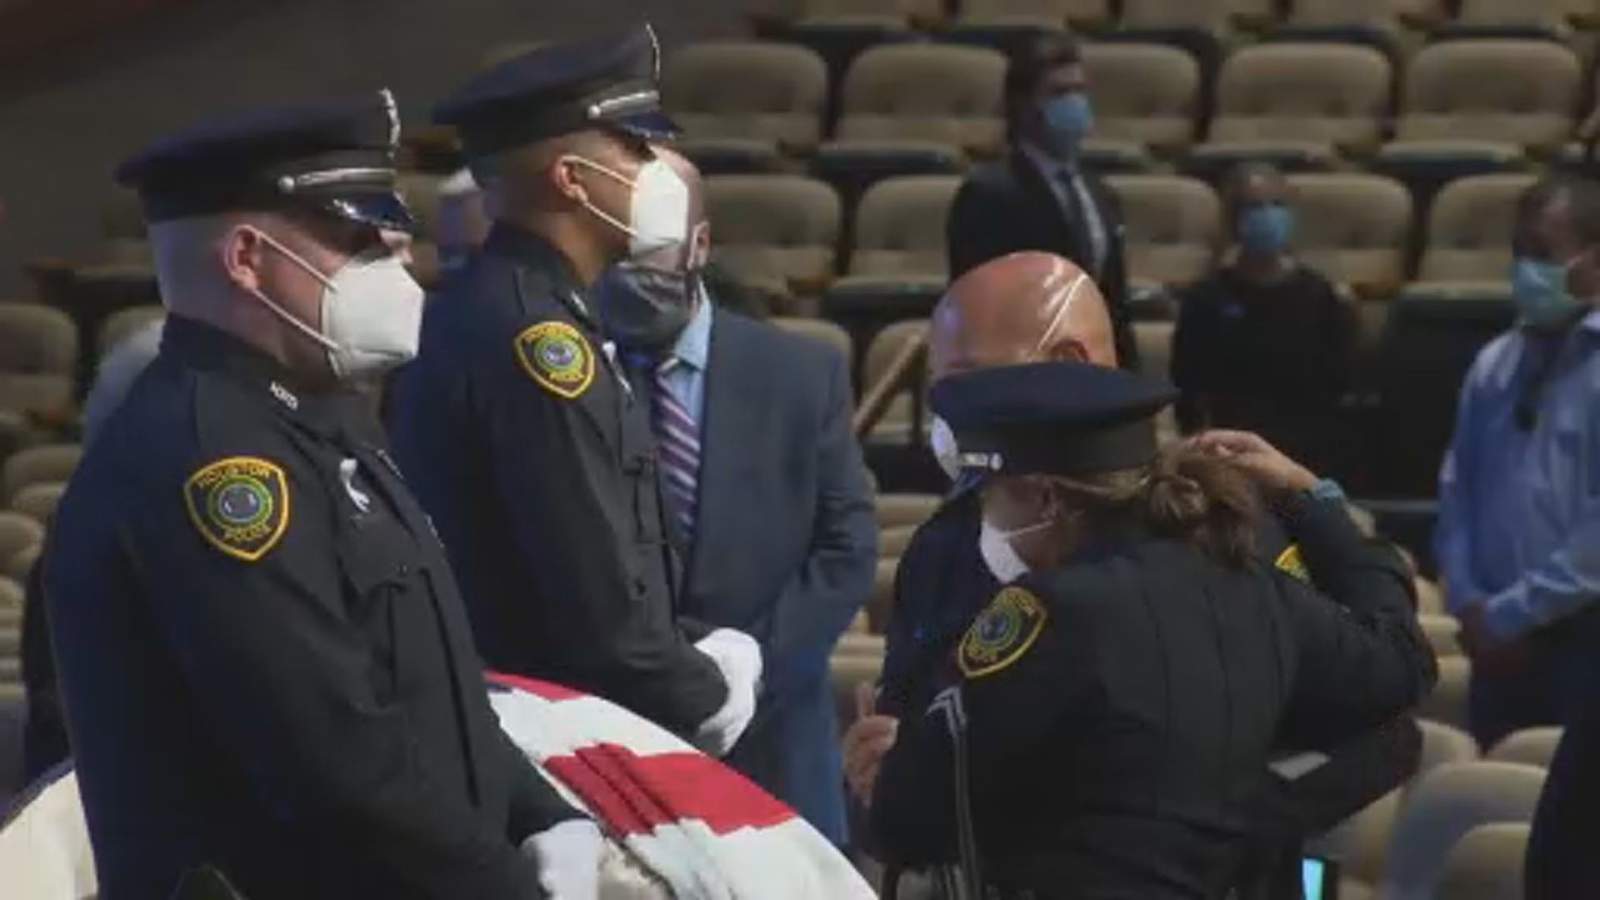 Family members, friends gather to pay respect to fallen HPD Officer Jason Knox during visitation service